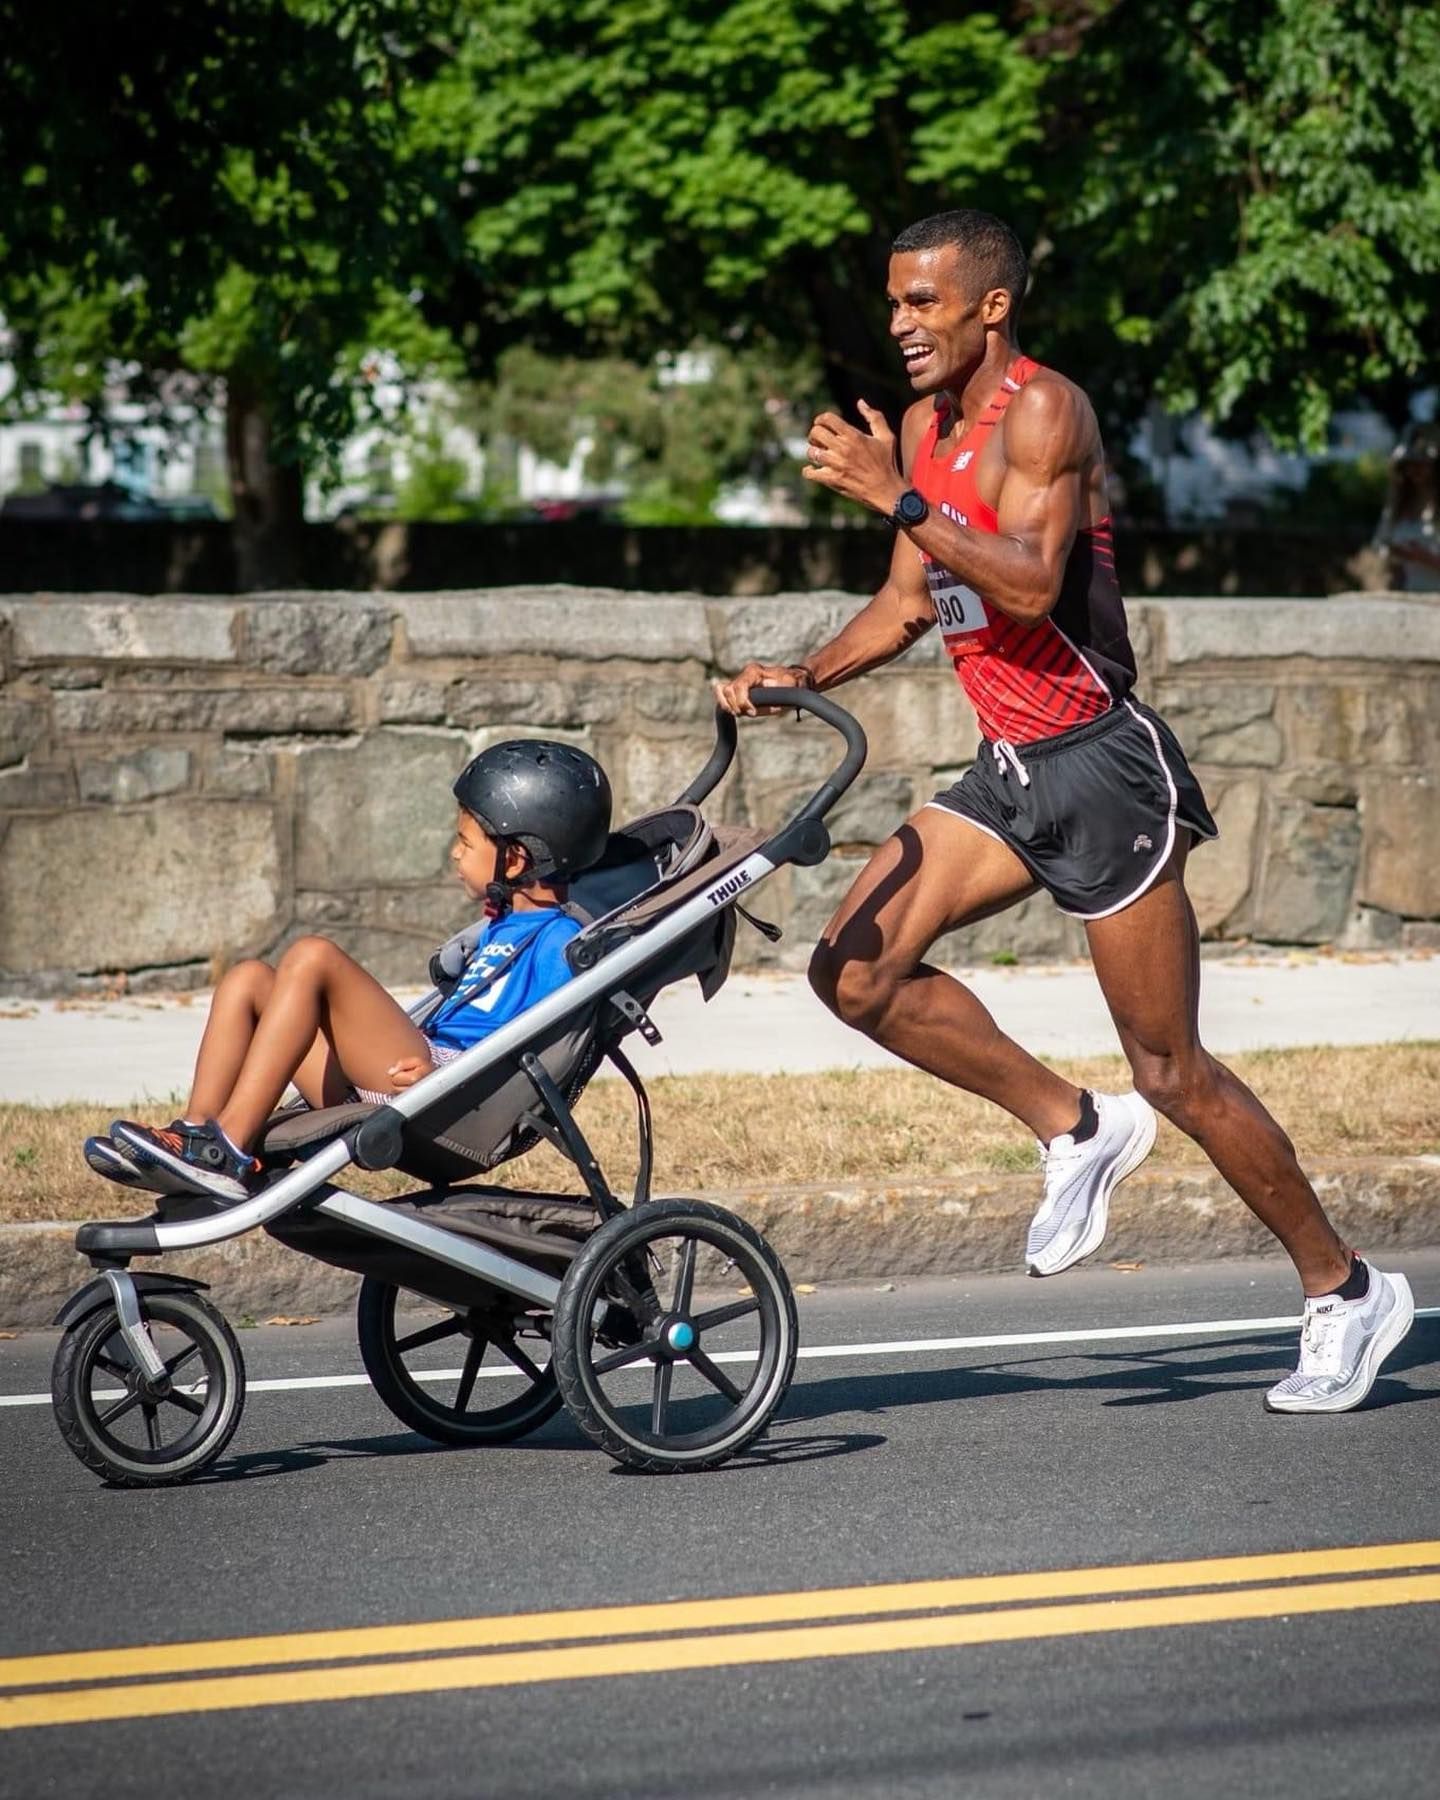 7 Ways to Get Your Kids into Running